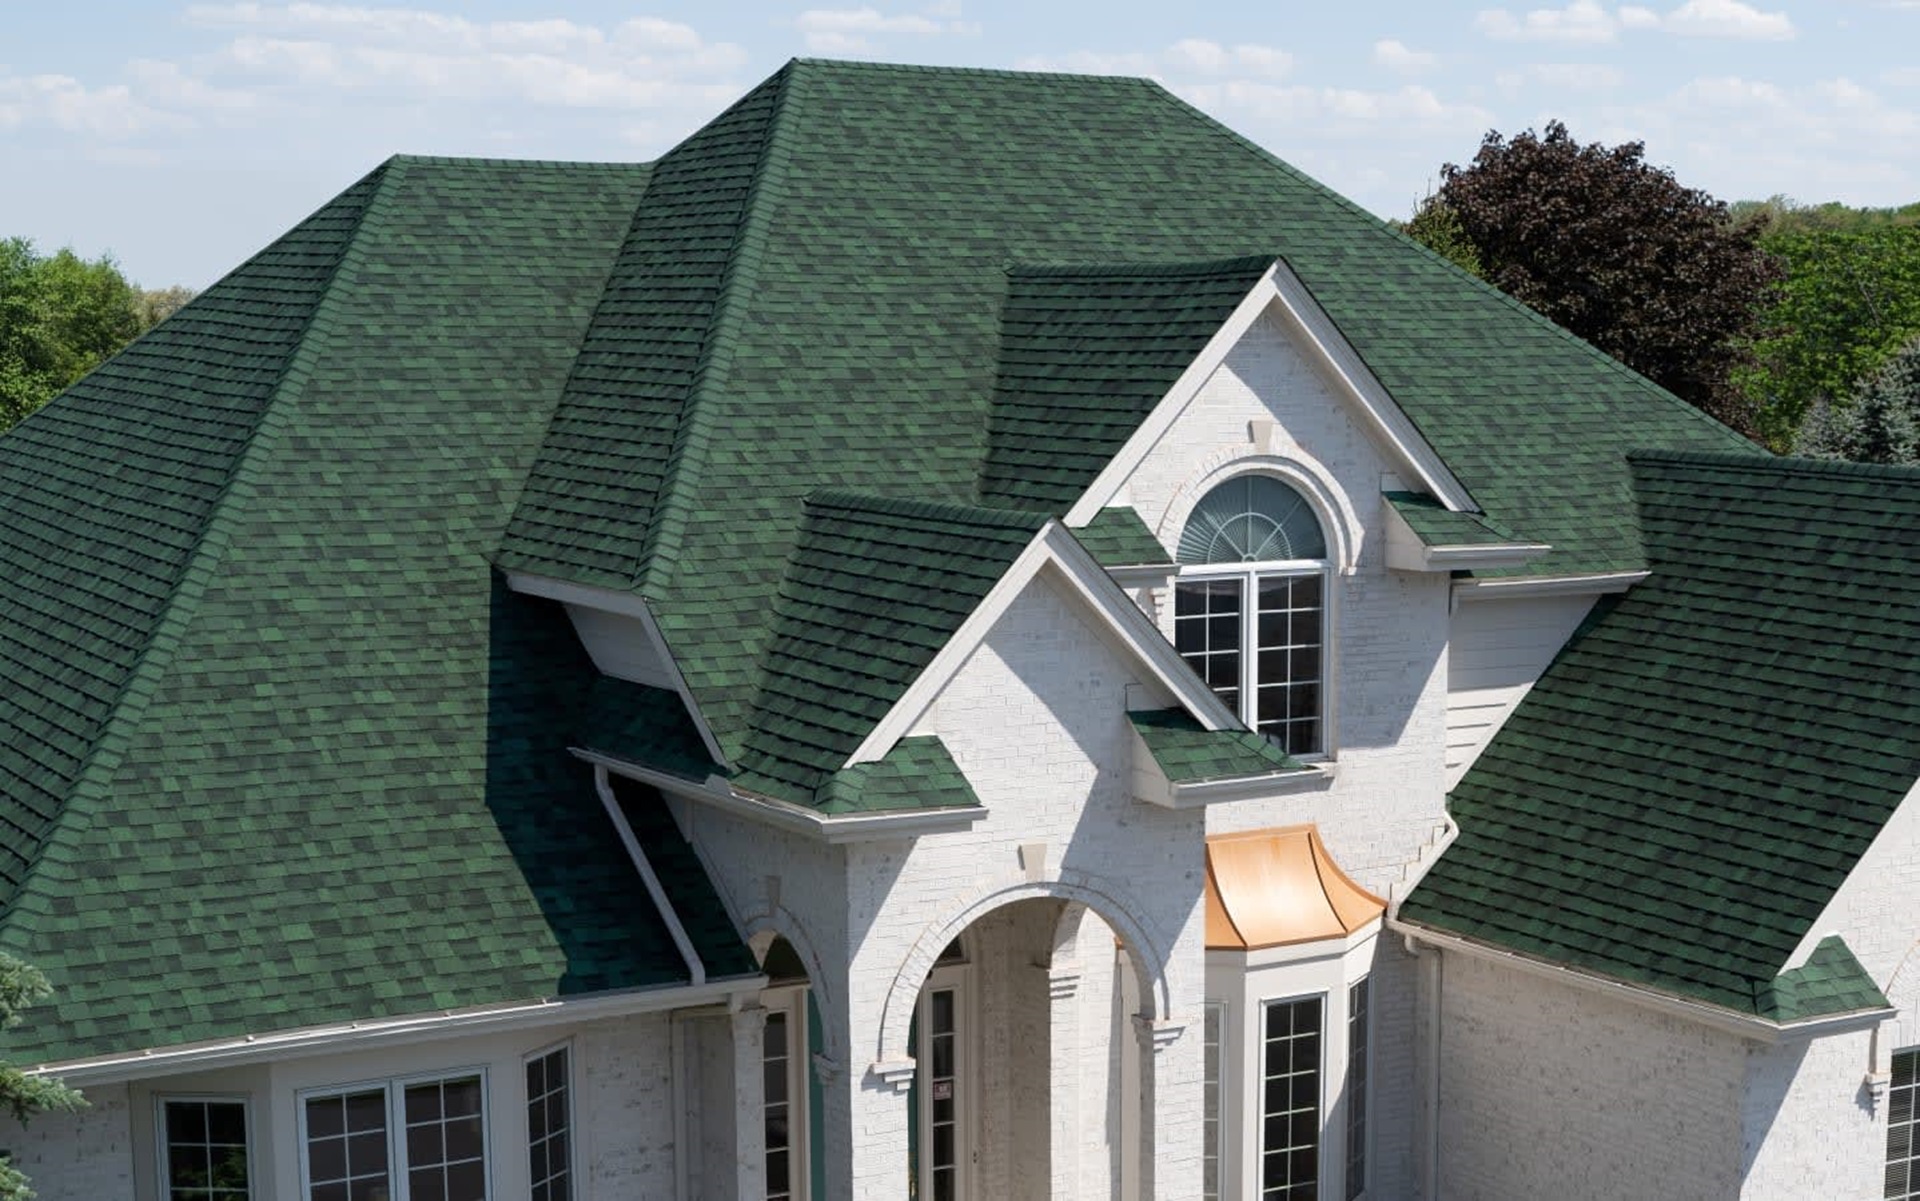 Comercial Roofing Services in San Clemente, California